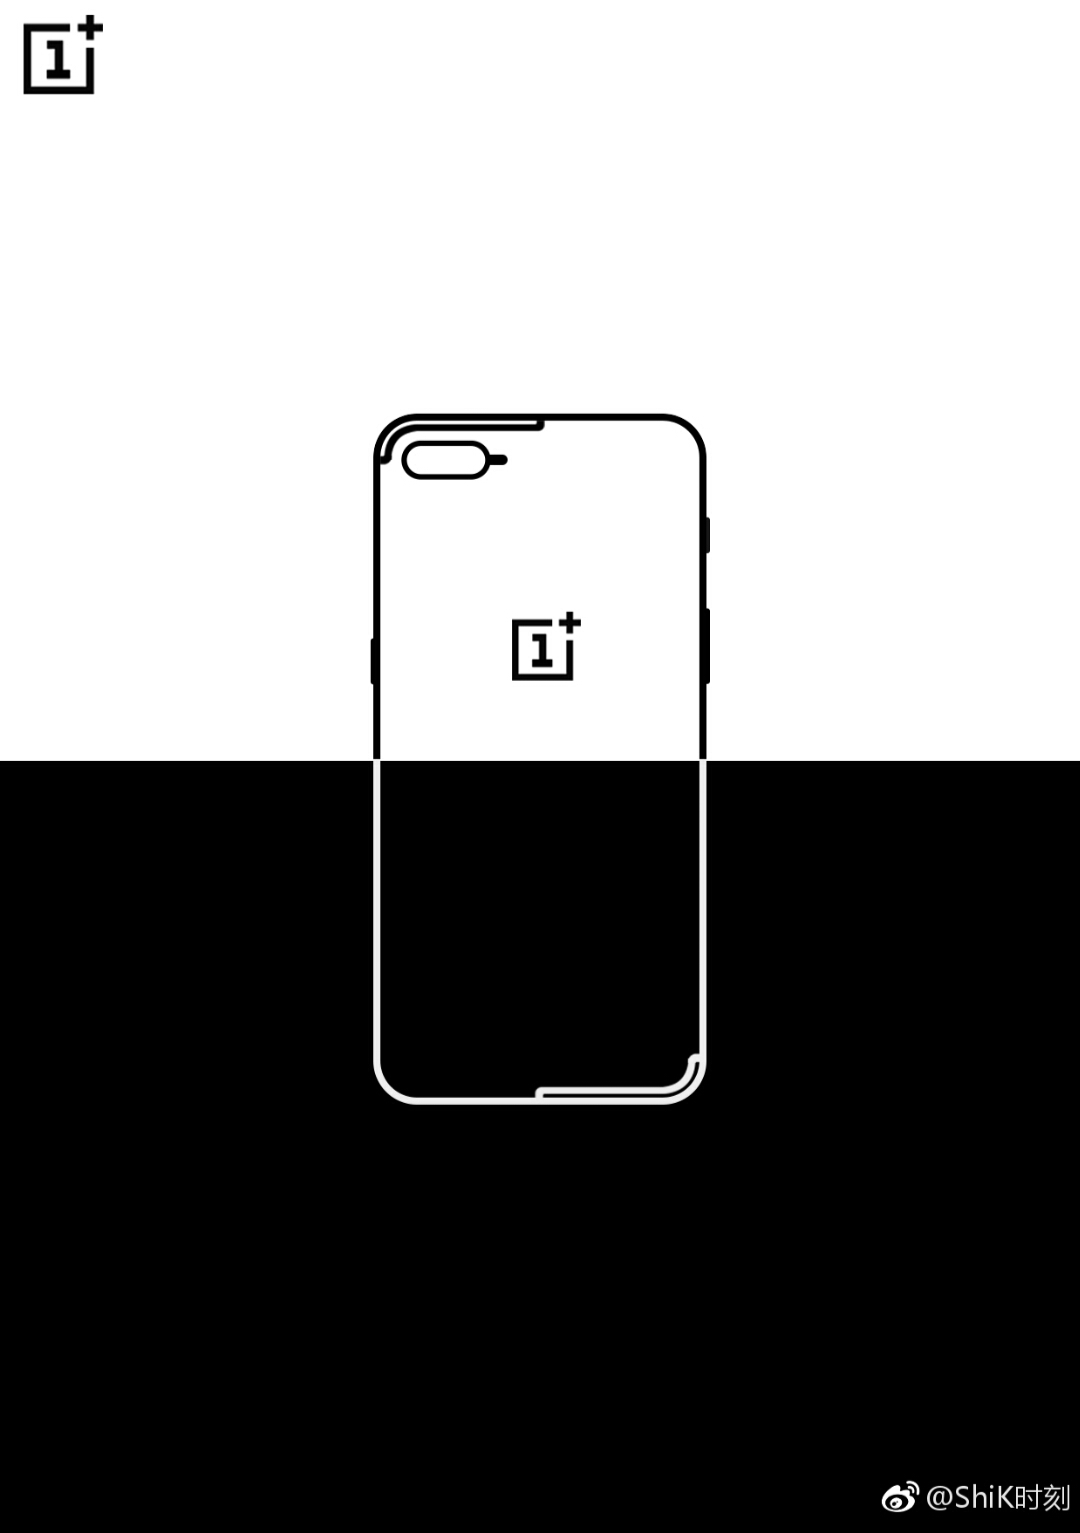 OnePlus 5 confirms to arrive on June 20 1